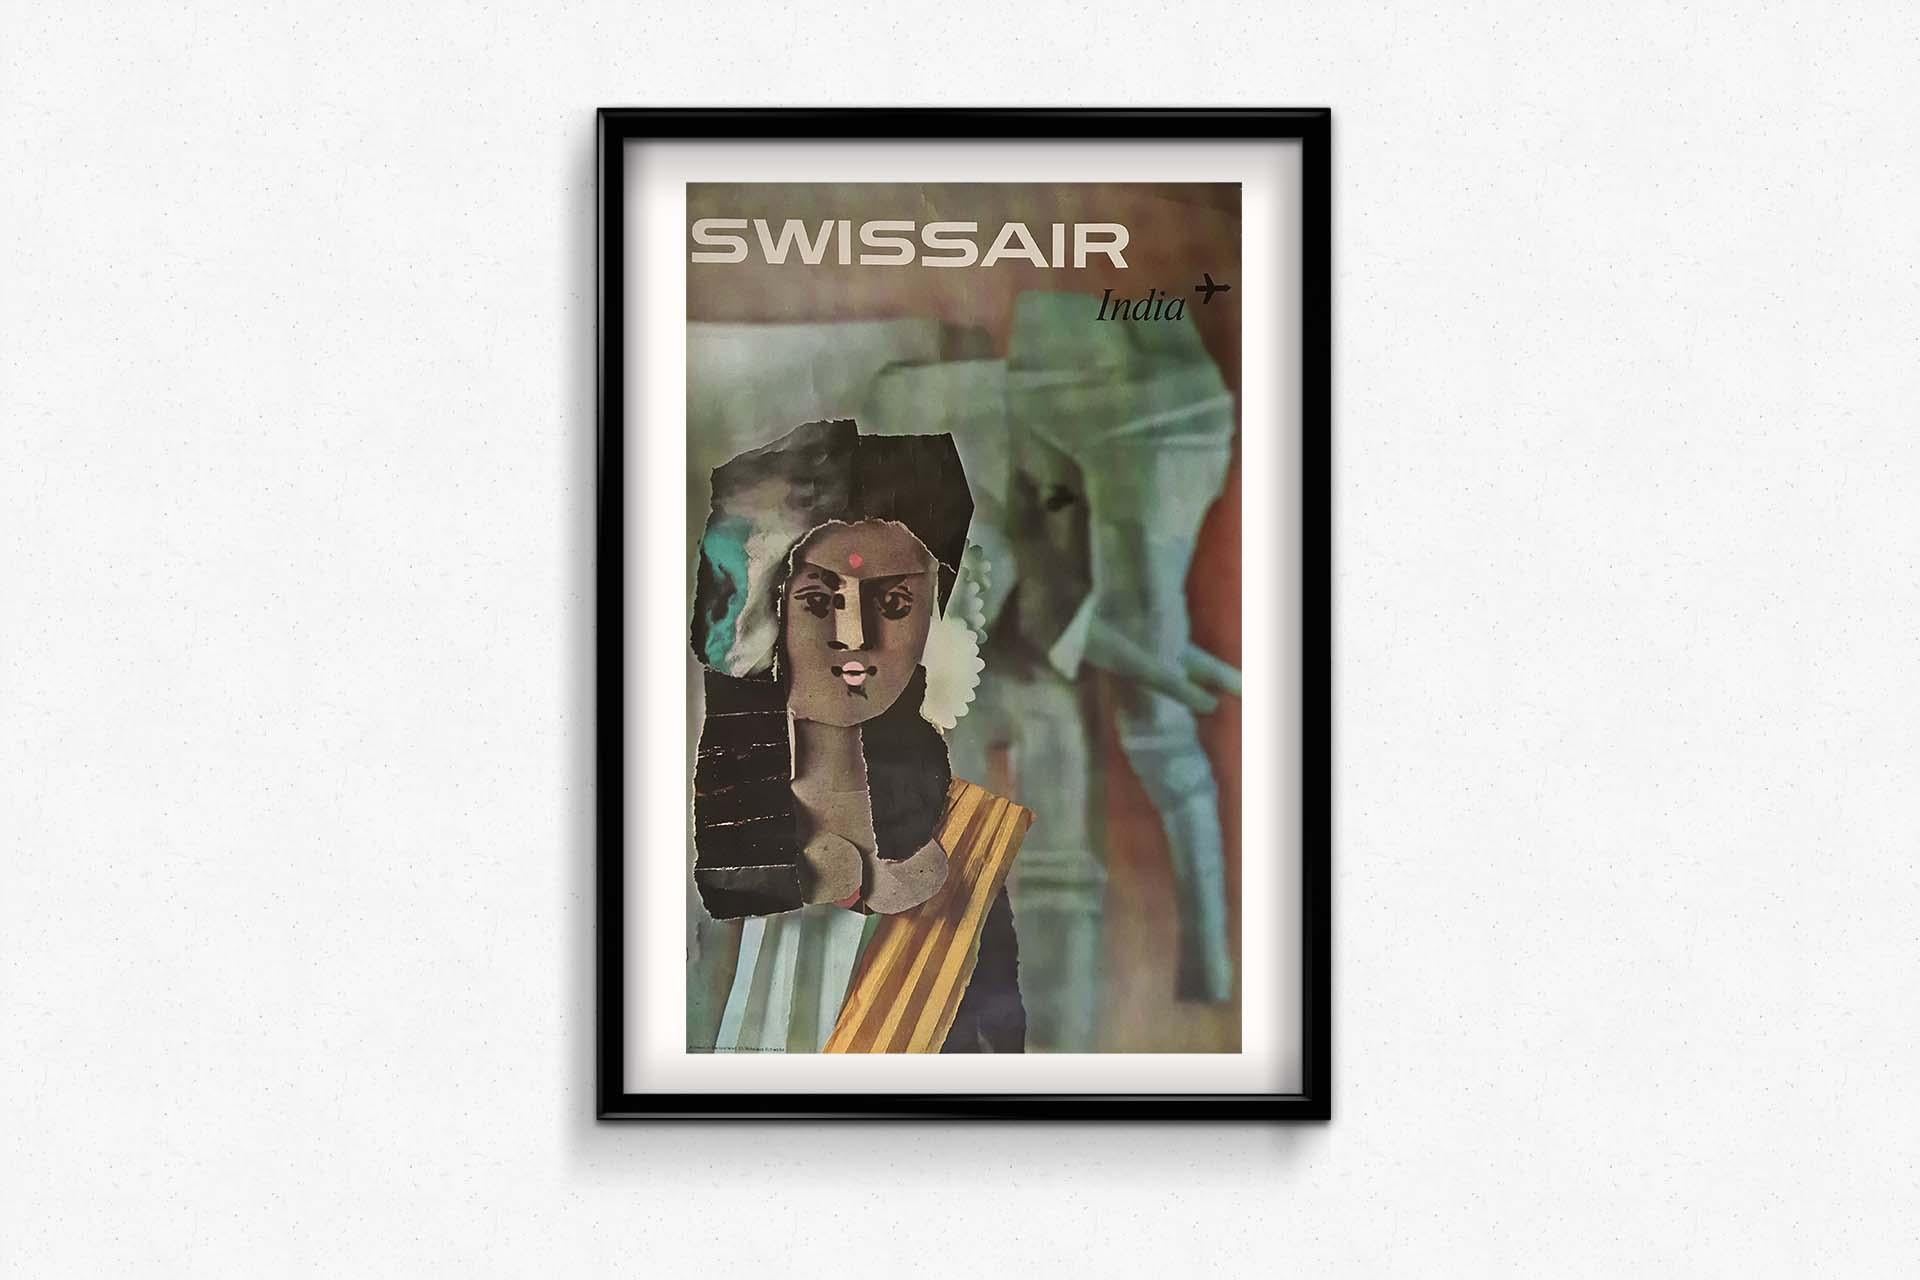 1961 Original travel poster by Nikolaus Schwabe - Swiss Air India For Sale 1